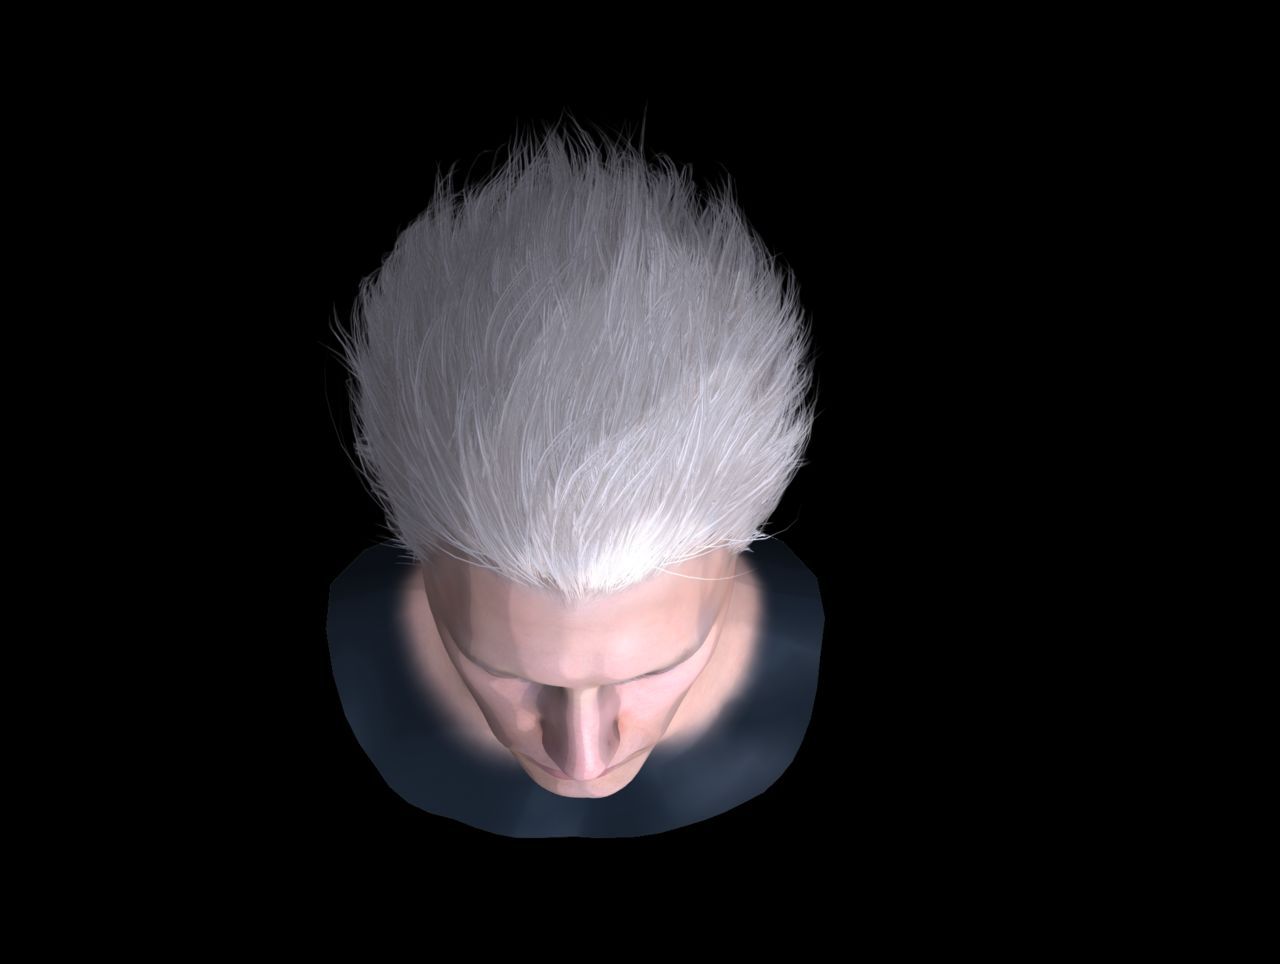 [J.A.] DMC5 | Vergil Head Reference PNG 46